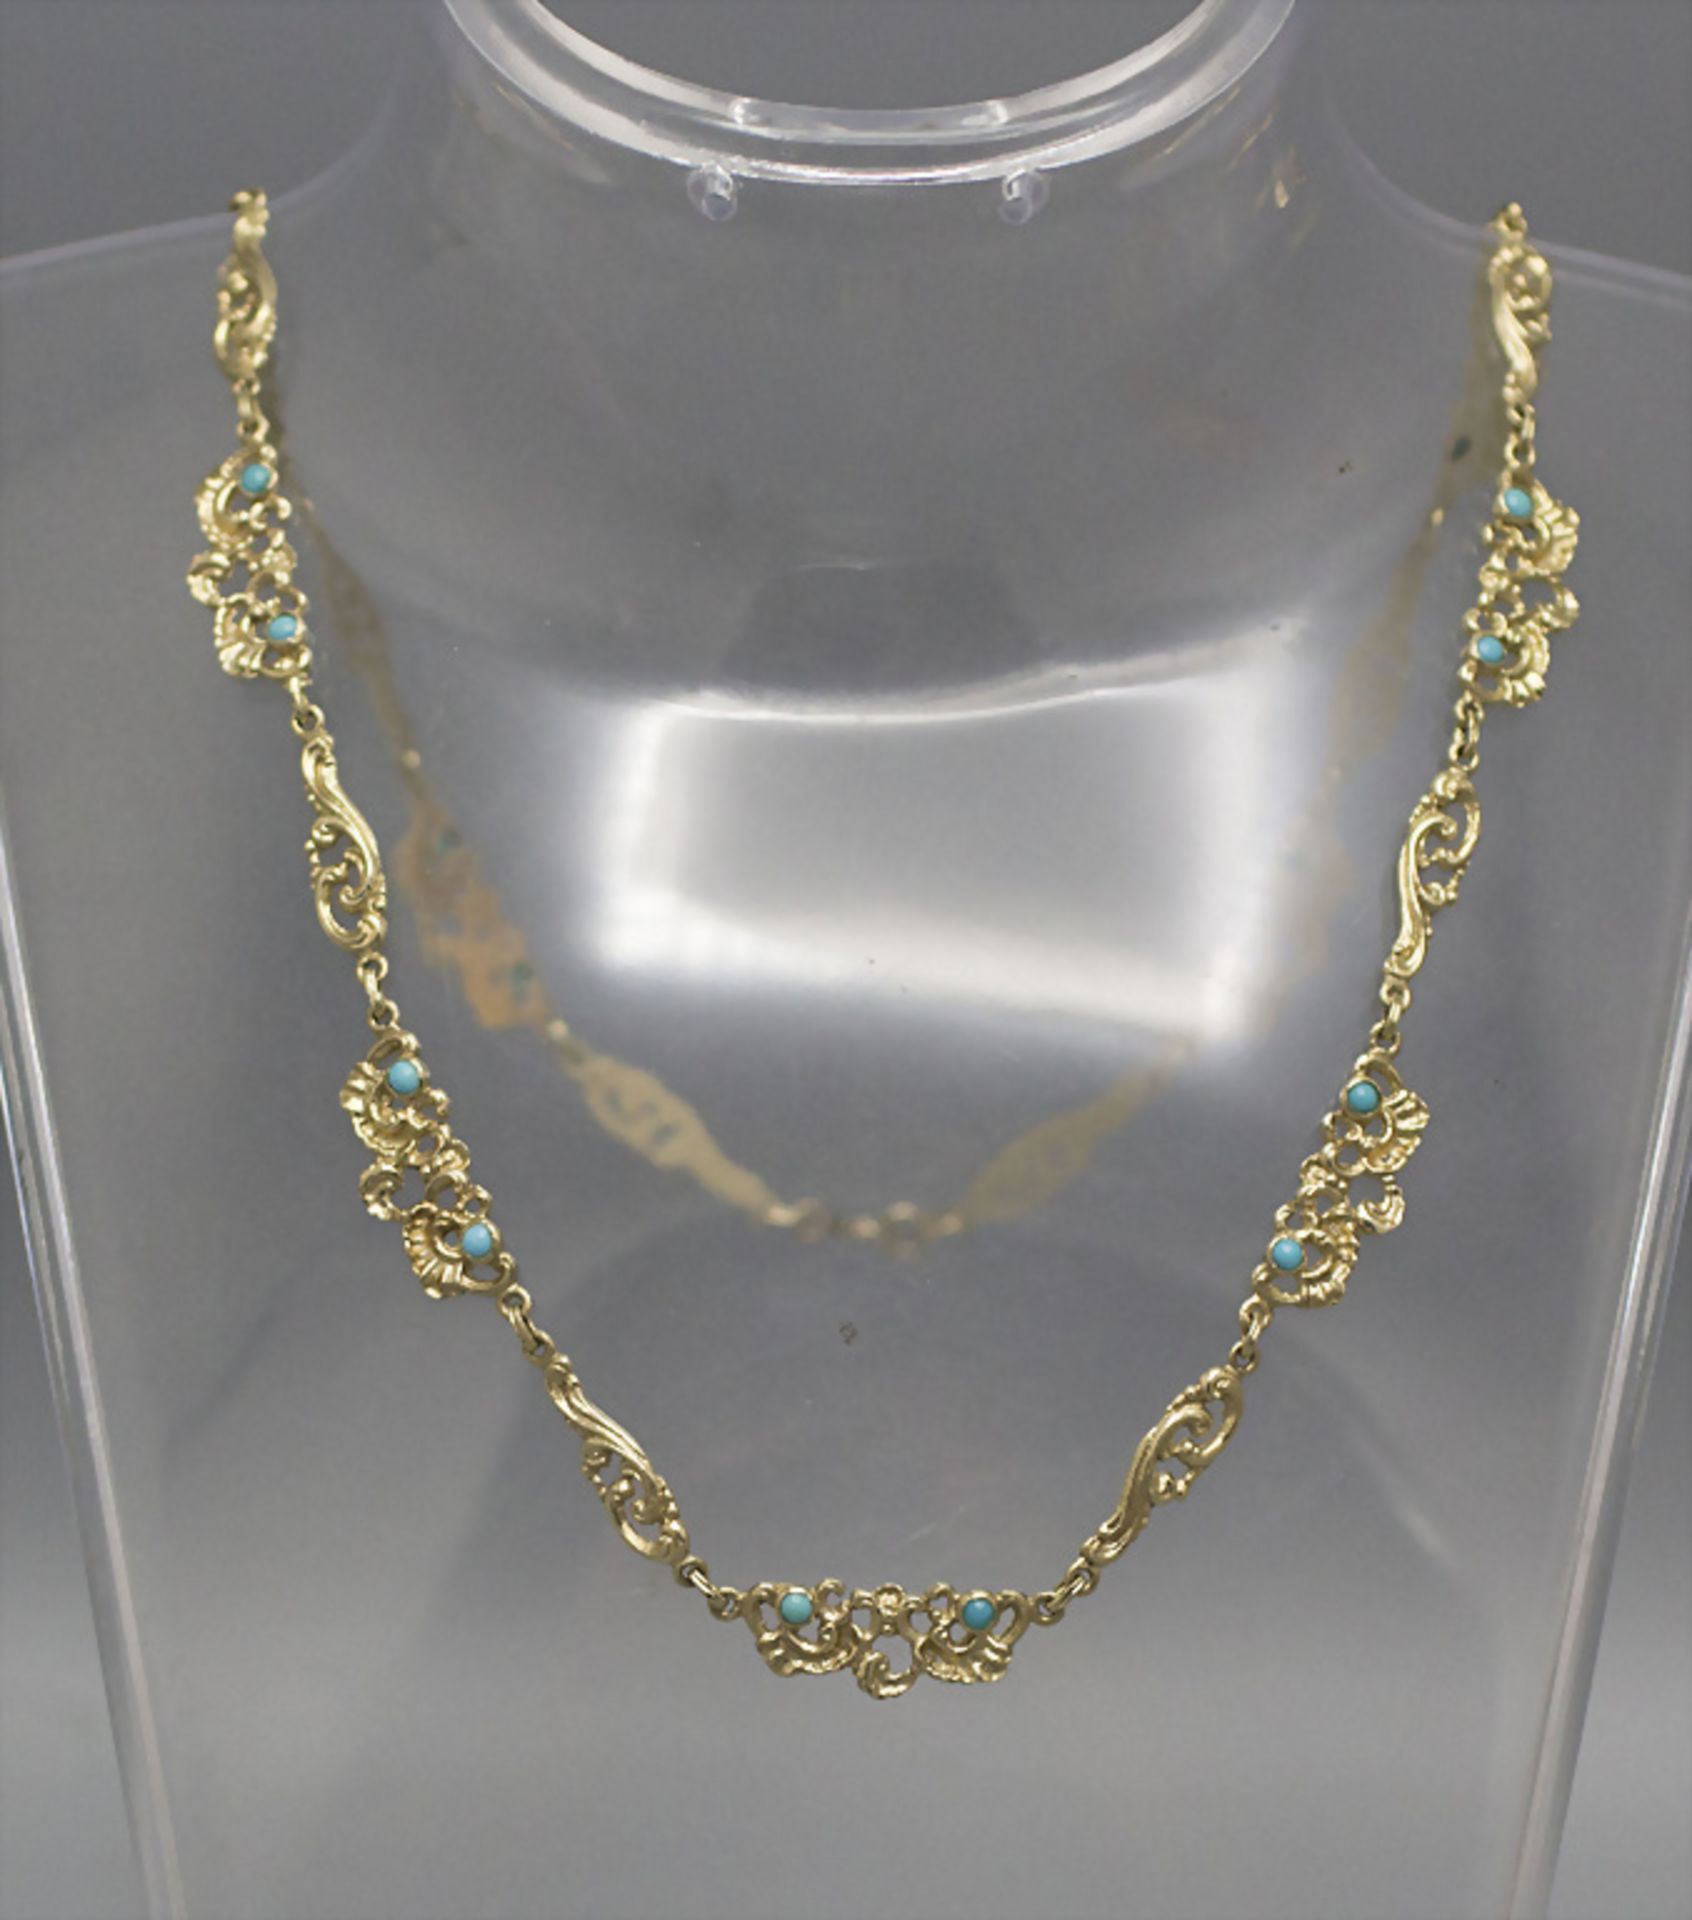 Halskette mit Türkisen / A 14 ct gold necklace with turquoises